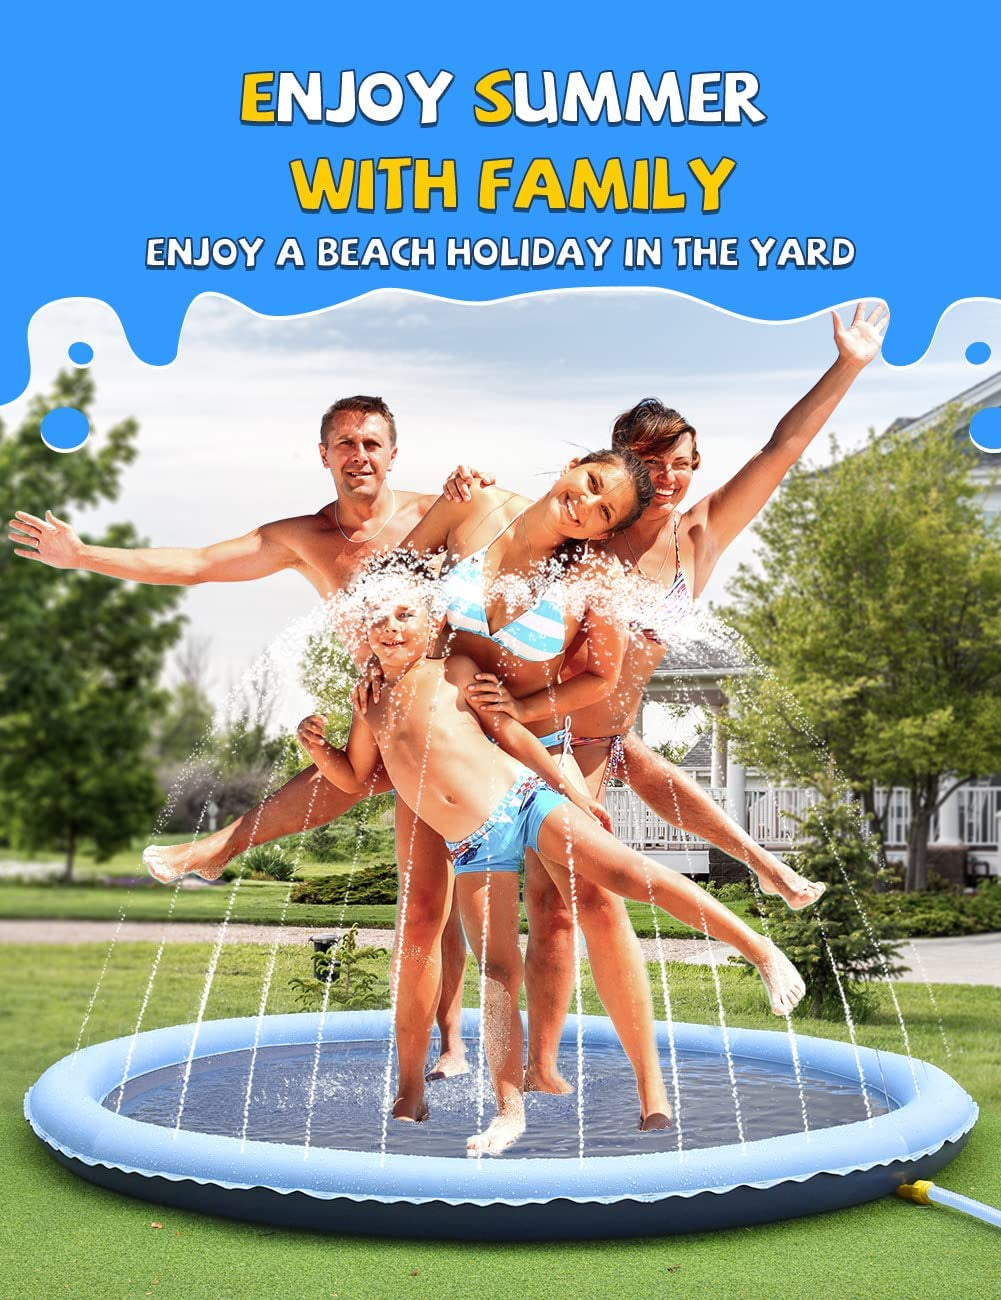 Non-Slip Splash Pad for Kids and Dog, Thicken Sprinkler Pool Summer Outdoor Water Toys - Fun Backyard Fountain Play Mat for Baby Girls Boys Children or Pet Dog (67 Inch, Blue&Blue)